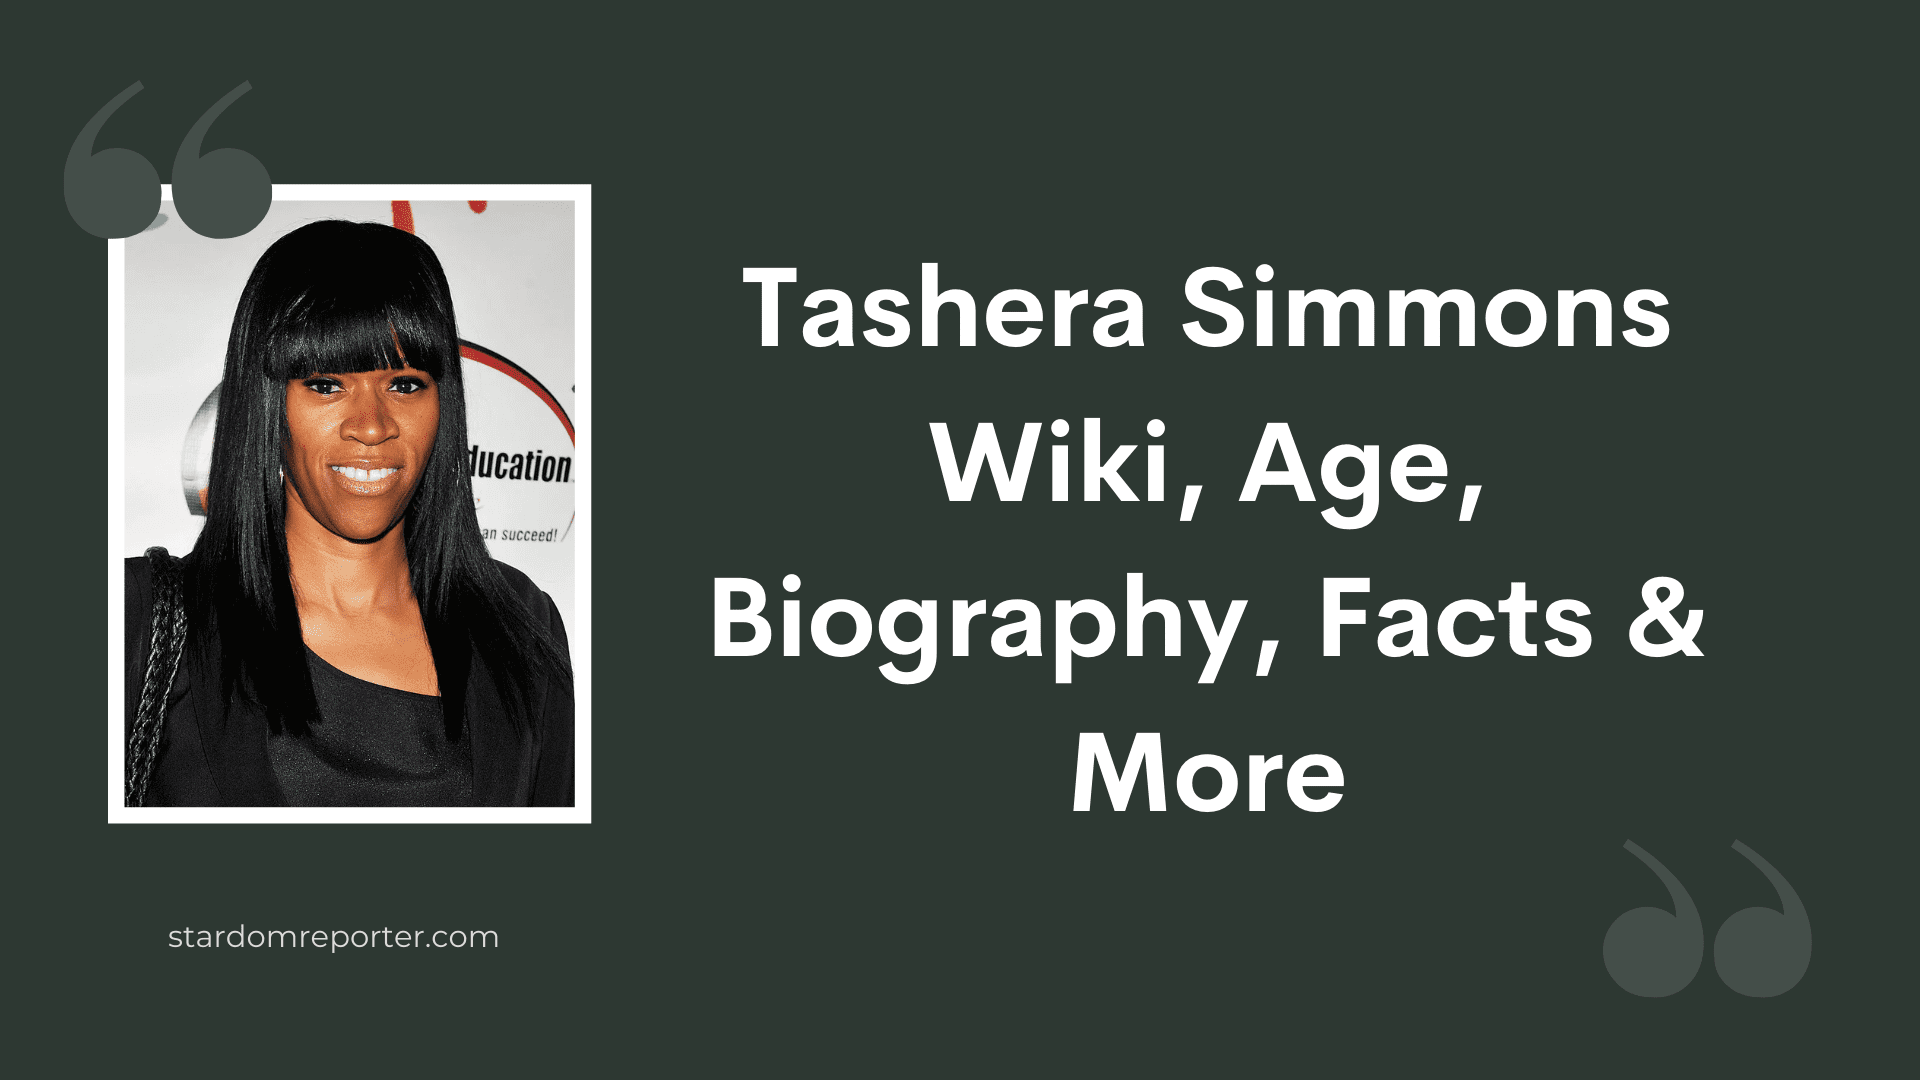 Tashera Simmons Wiki, Age, Biography, Facts & More - 11